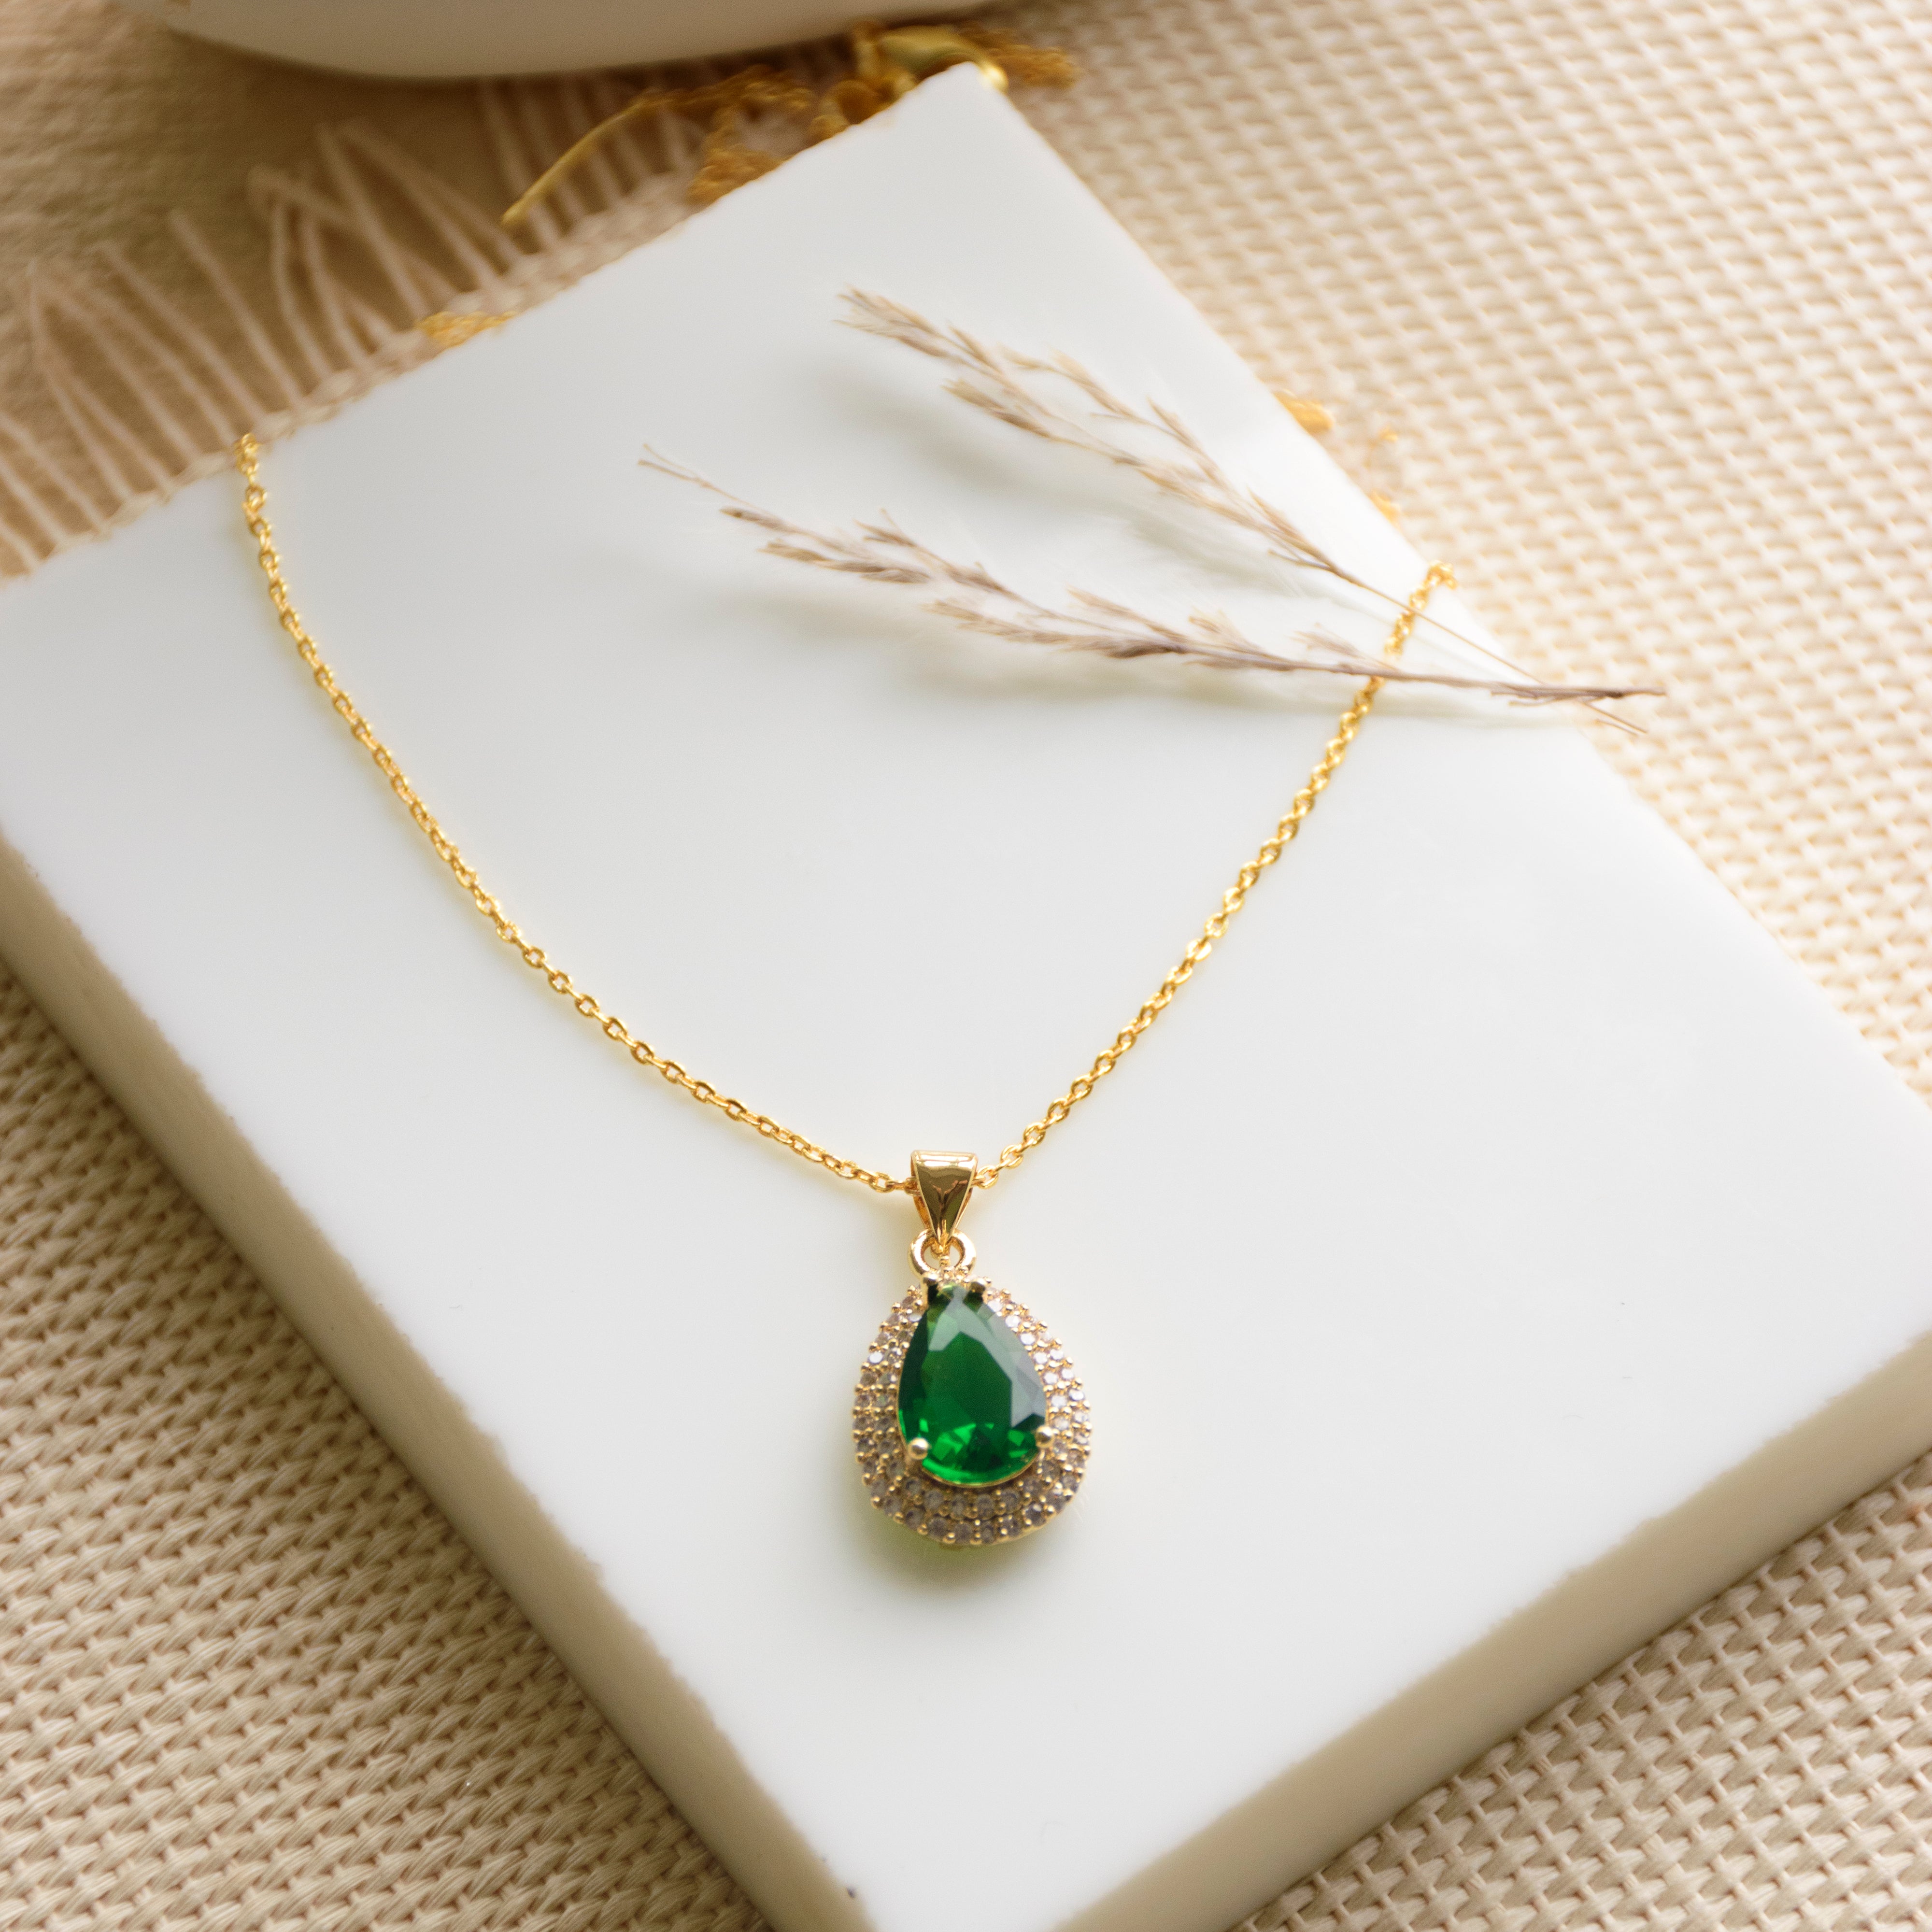 The Enigmatic Emerald Mix Necklace